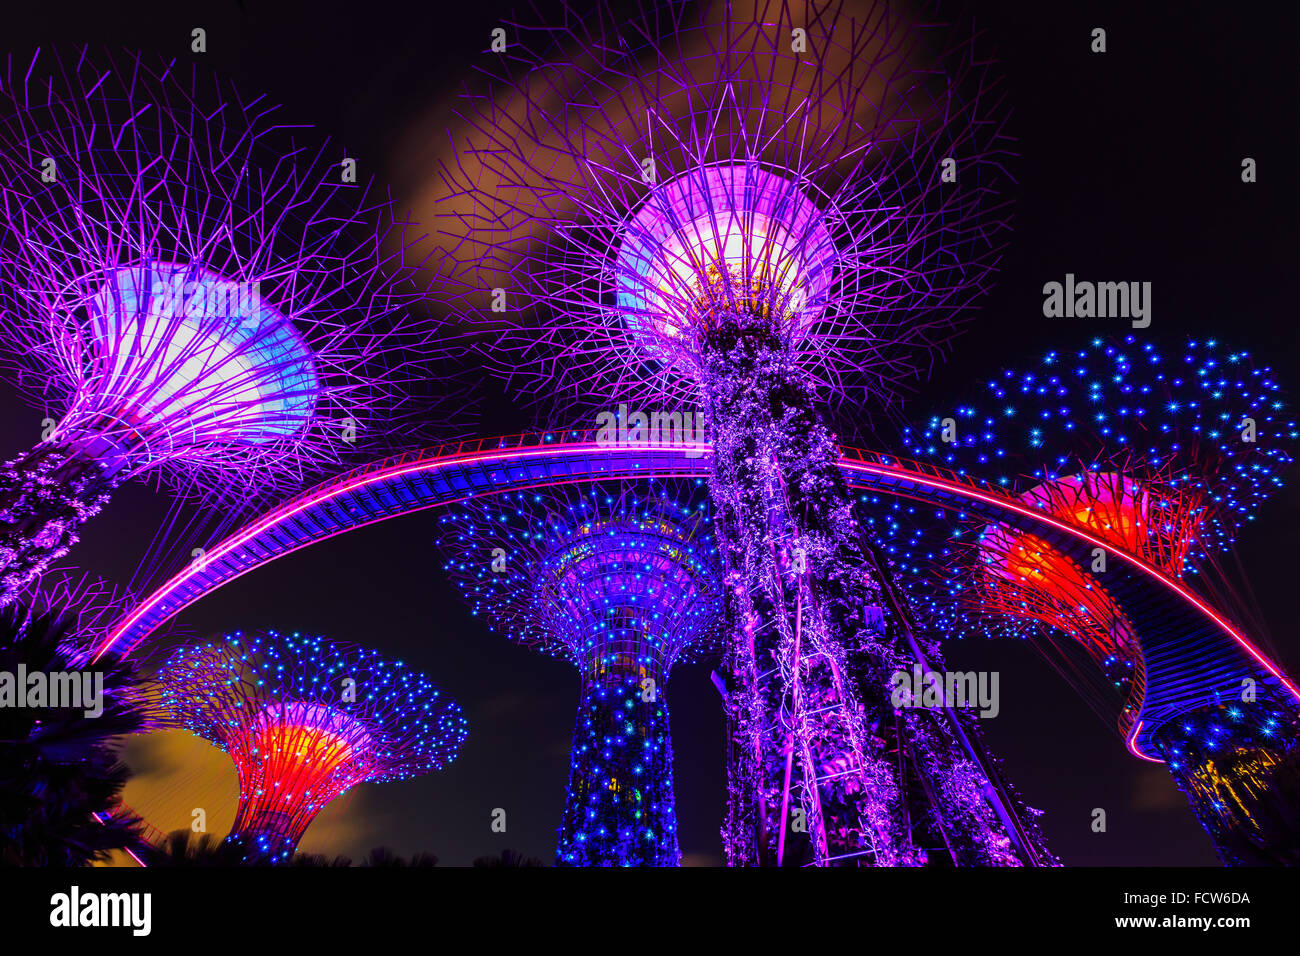 Singapore City, Singapore. Gardens by the Bay at night. Stock Photo